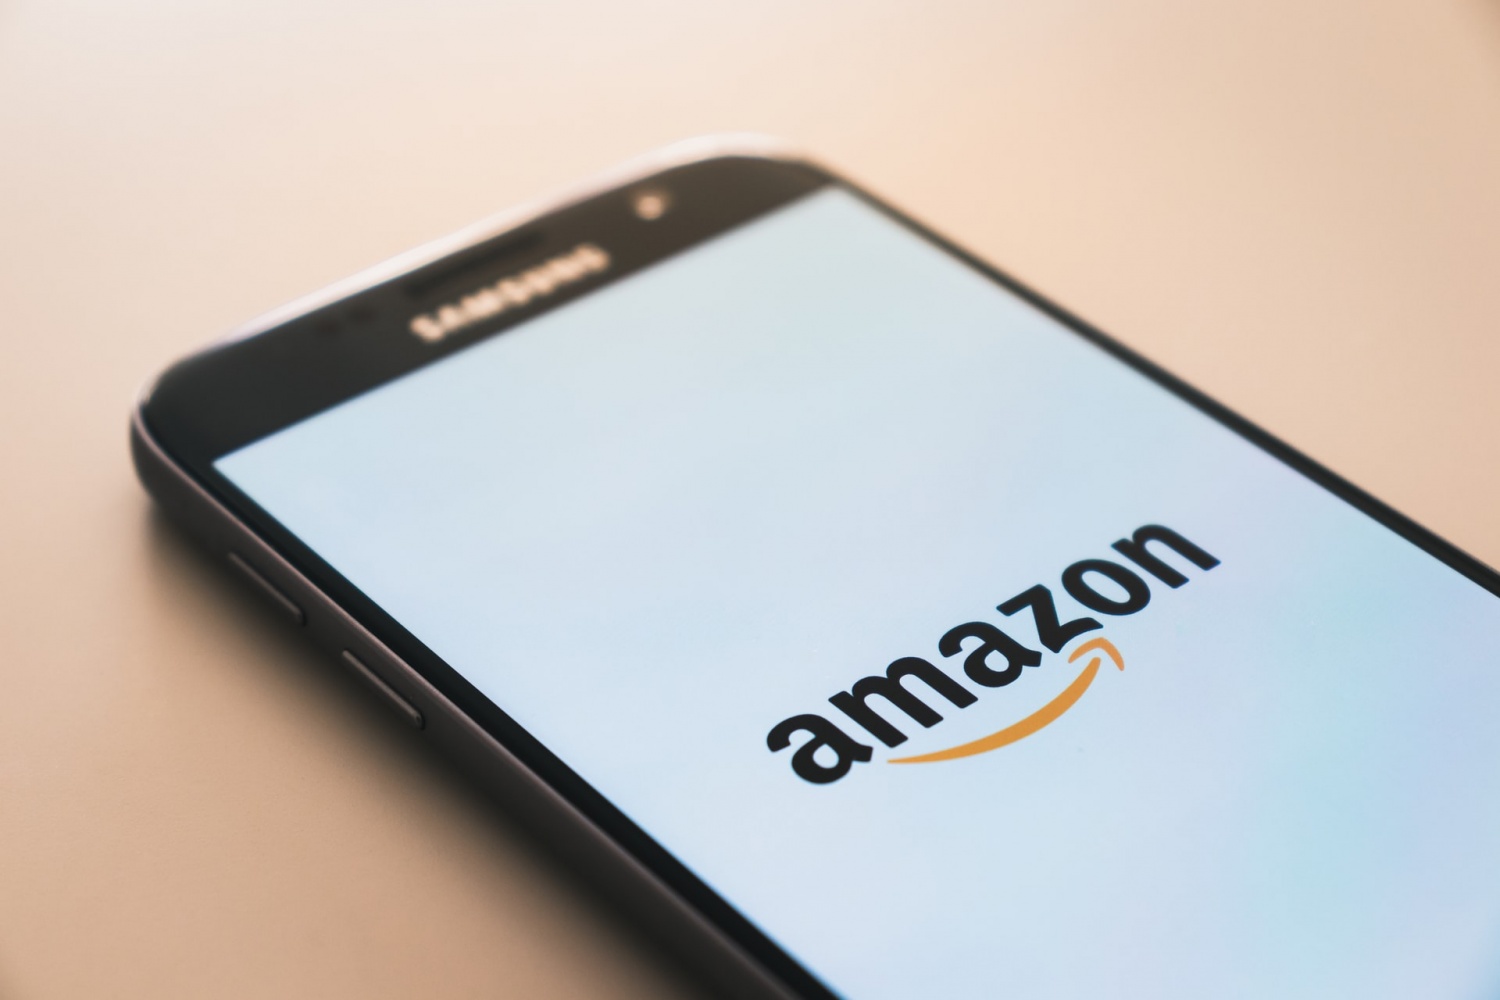 Amazon to Turn Hosts Into DJs Through Building a Clubhouse Competitor App